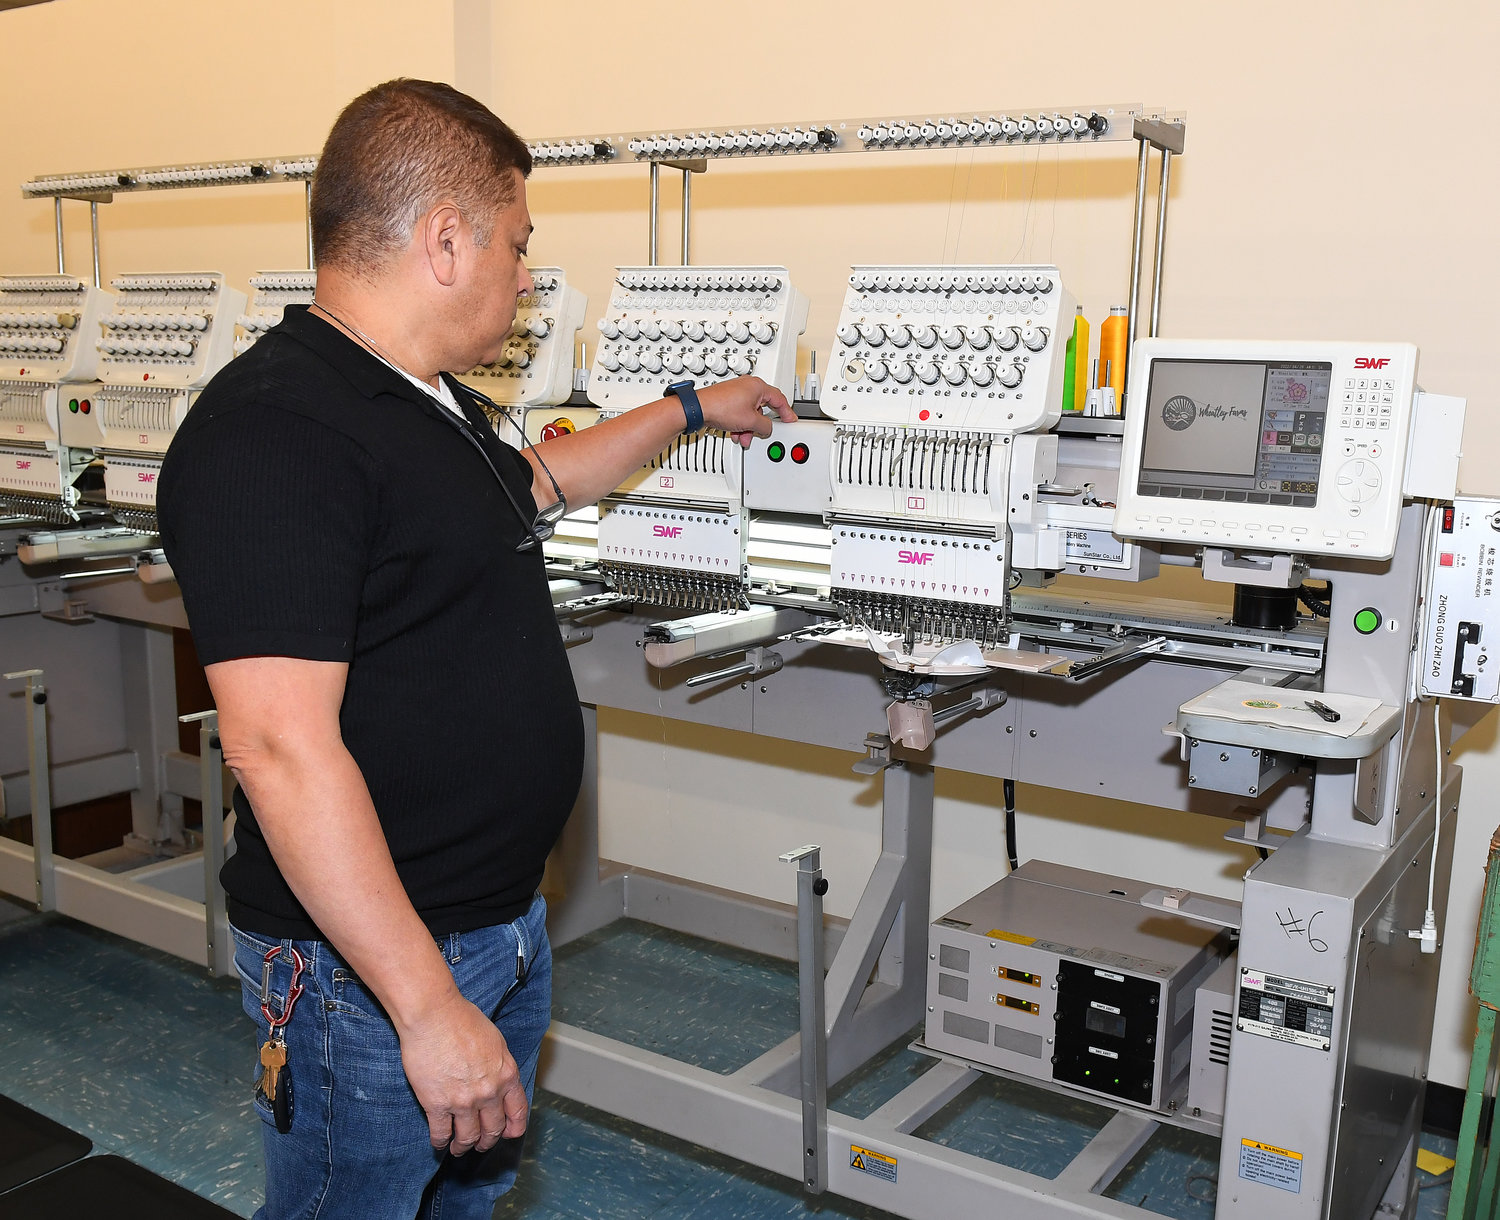 Devinson Sanchez demonstrated the complex embroidery machines with which AHRC will develop a new business line.